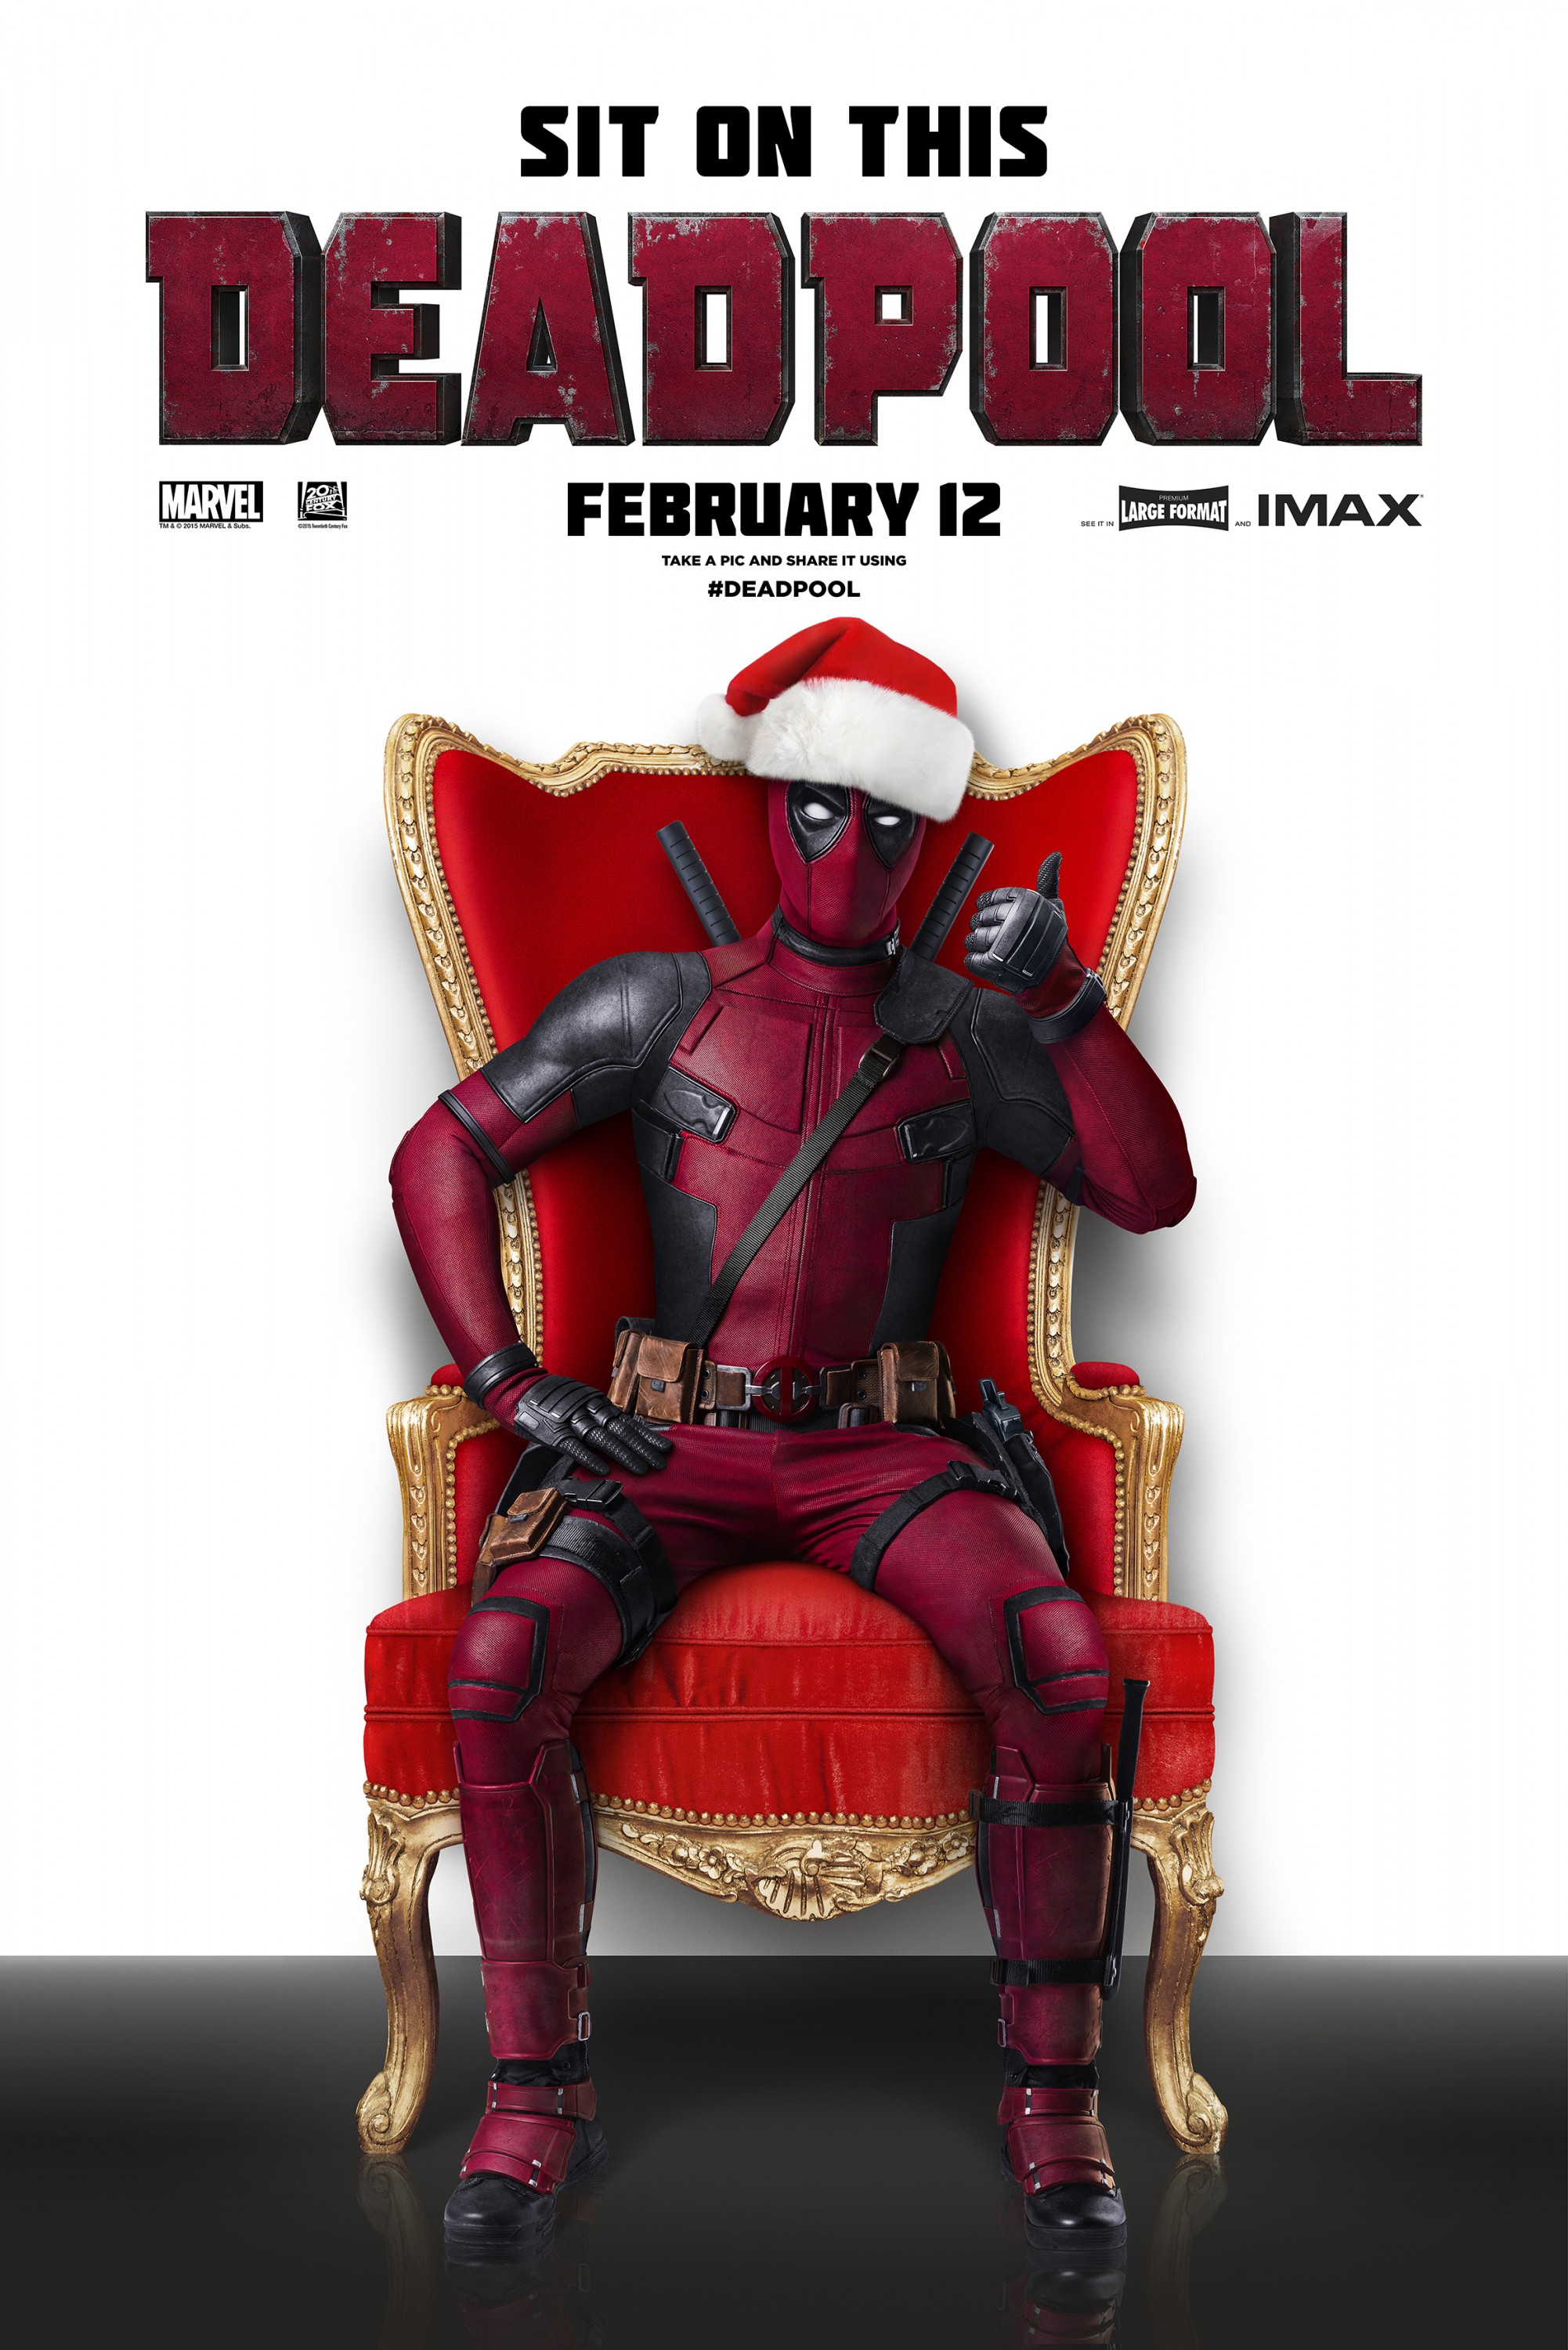 Mega Sized Movie Poster Image for Deadpool (#2 of 15)